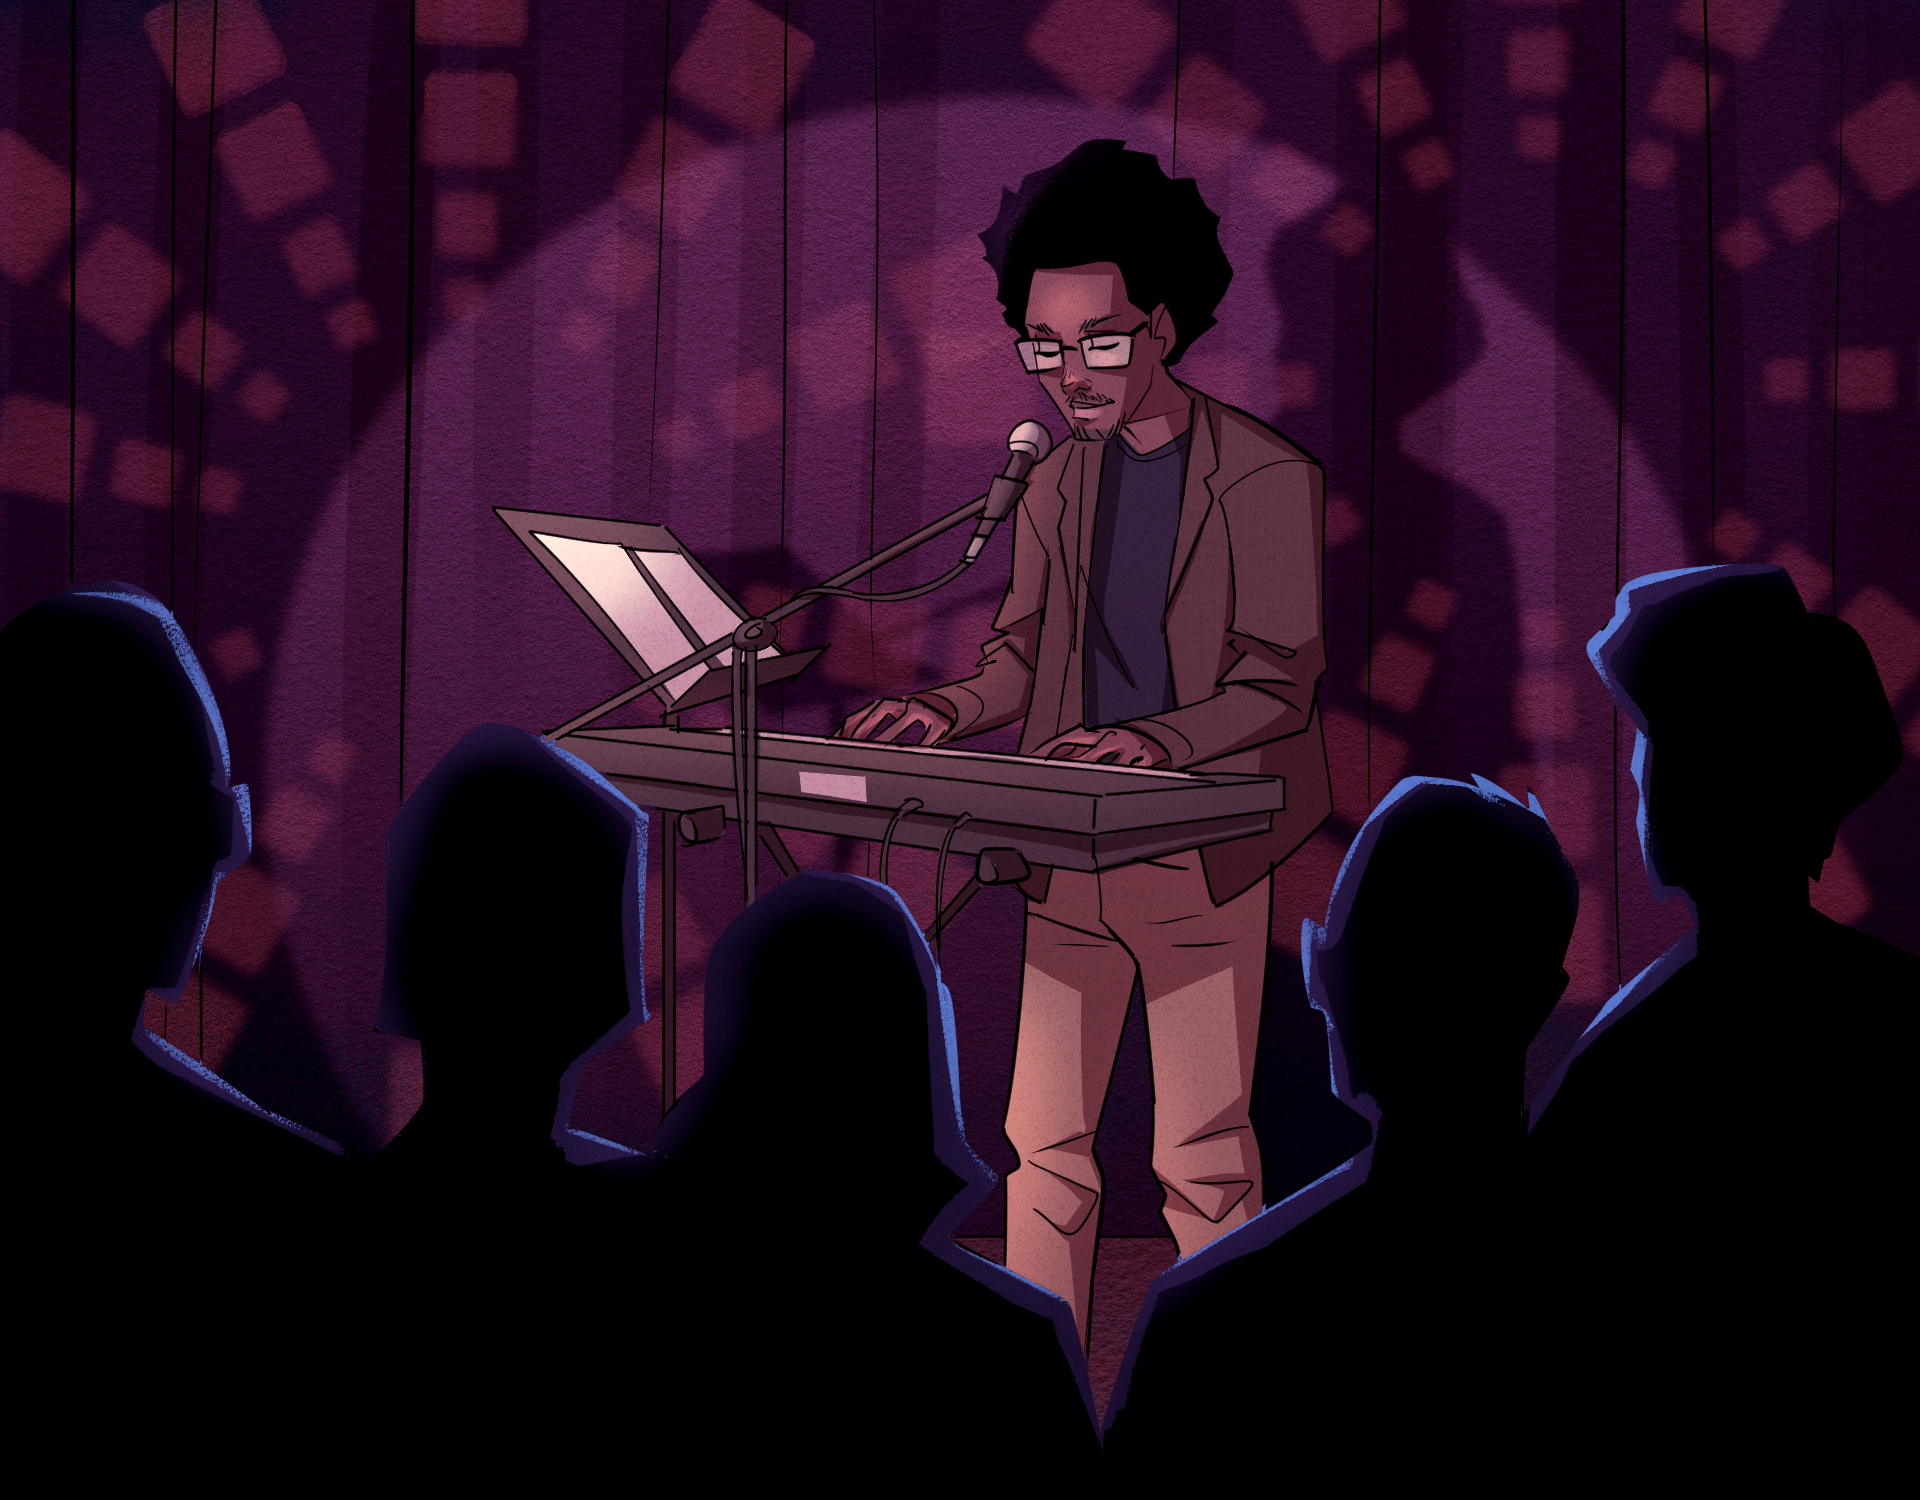 Illustration of stand-up comic with dark skin and glasses playing keyboard in front of audience, bathed in purple light.